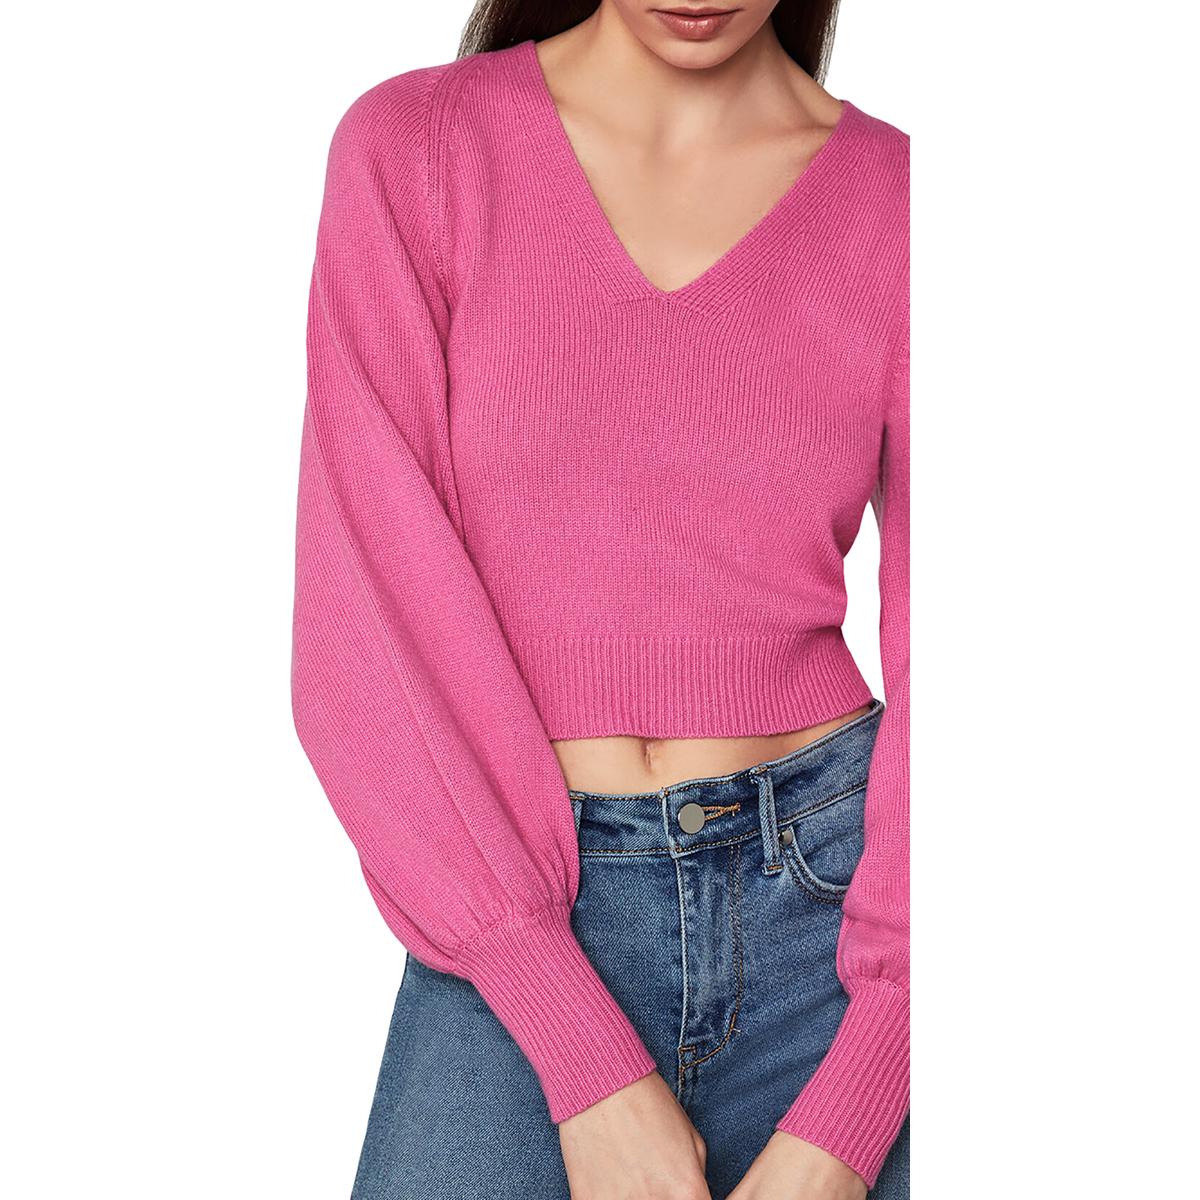 BCBG Max Azria Women/'s Ribbed Knit Cropped Balloon Sleeve Sweater